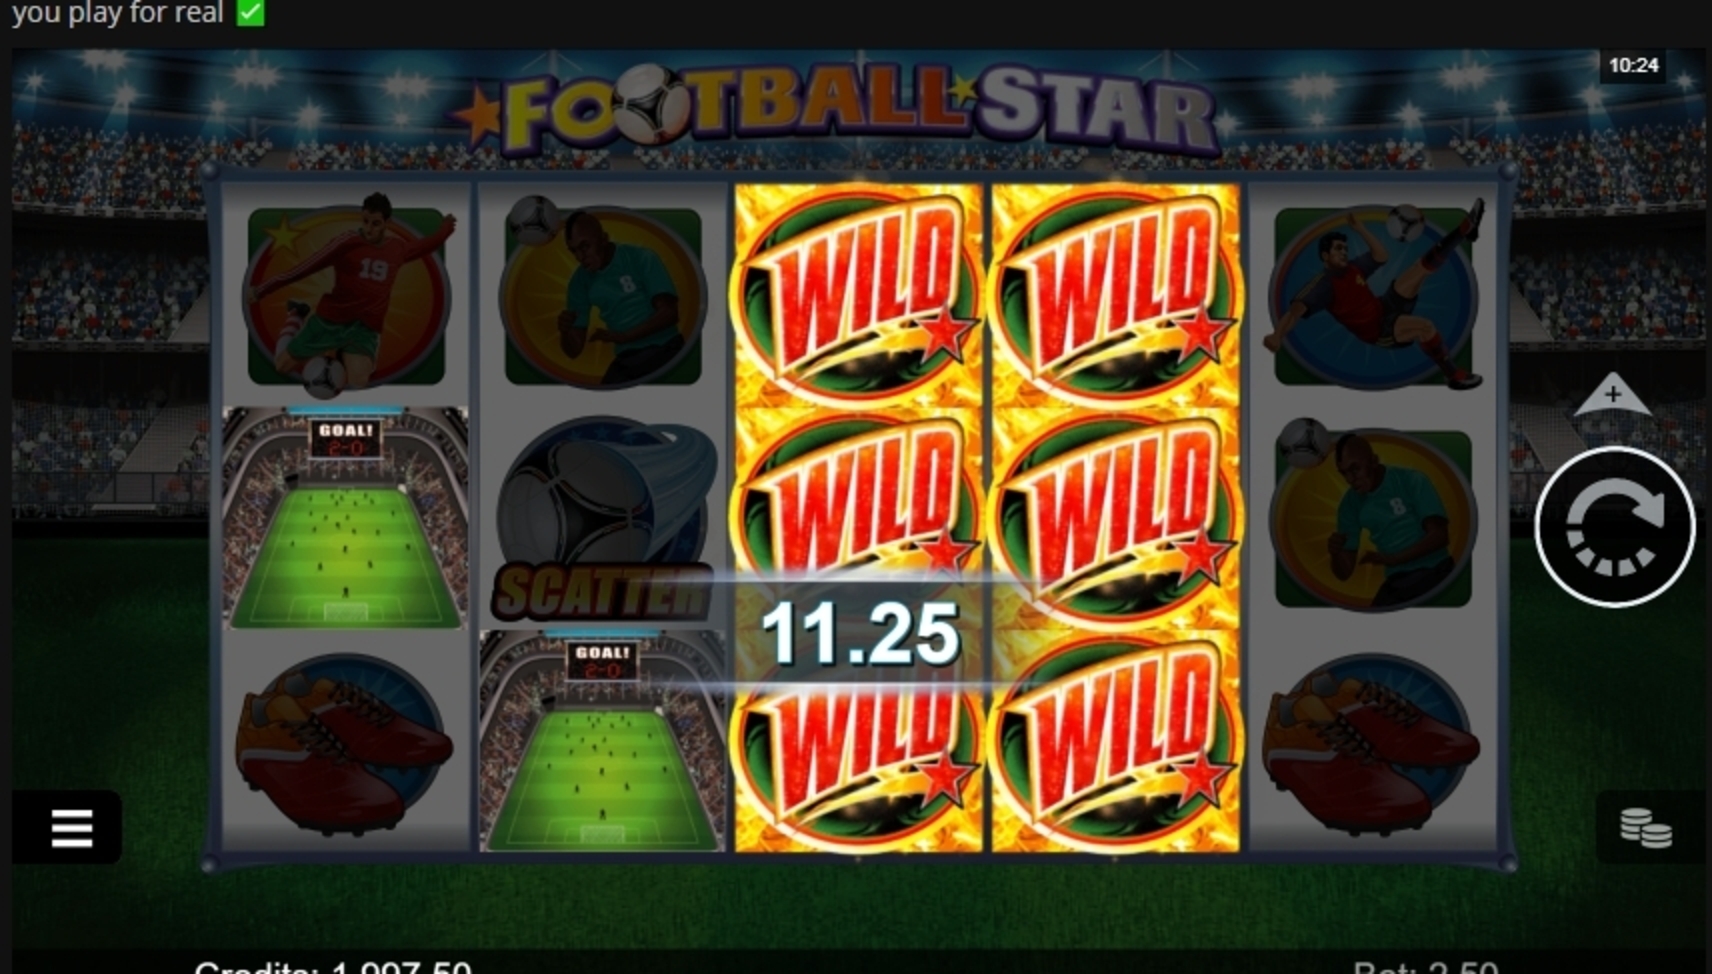 Win Money in Football Star Free Slot Game by Microgaming